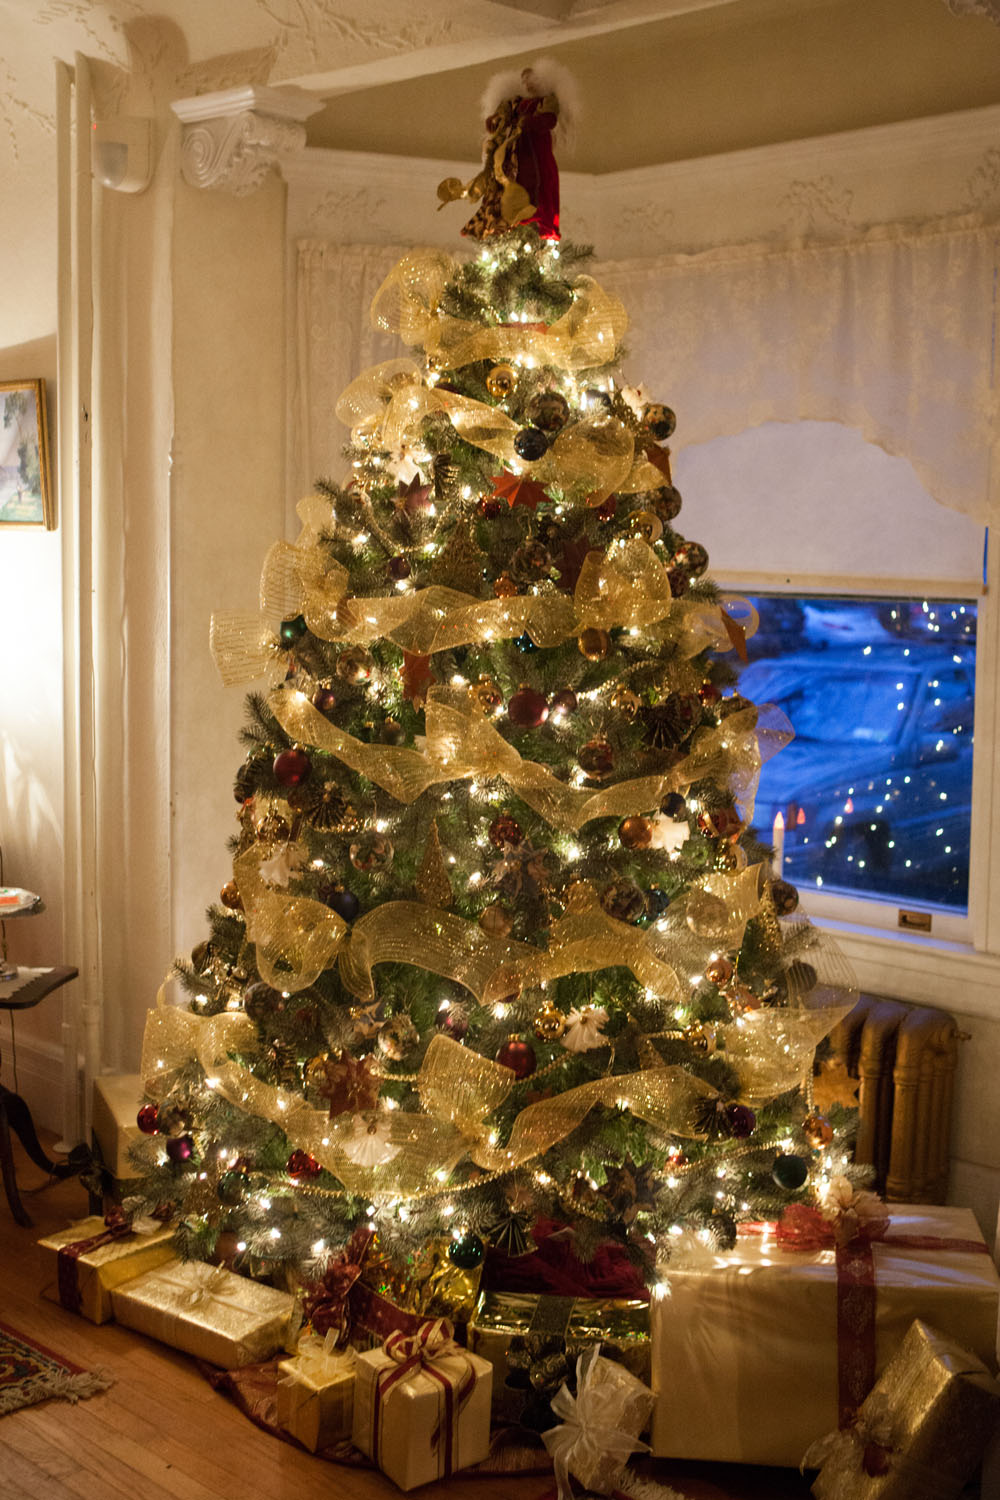 A decorated tree in the Joseph N. Hallock/Ann Currie-Bell House.